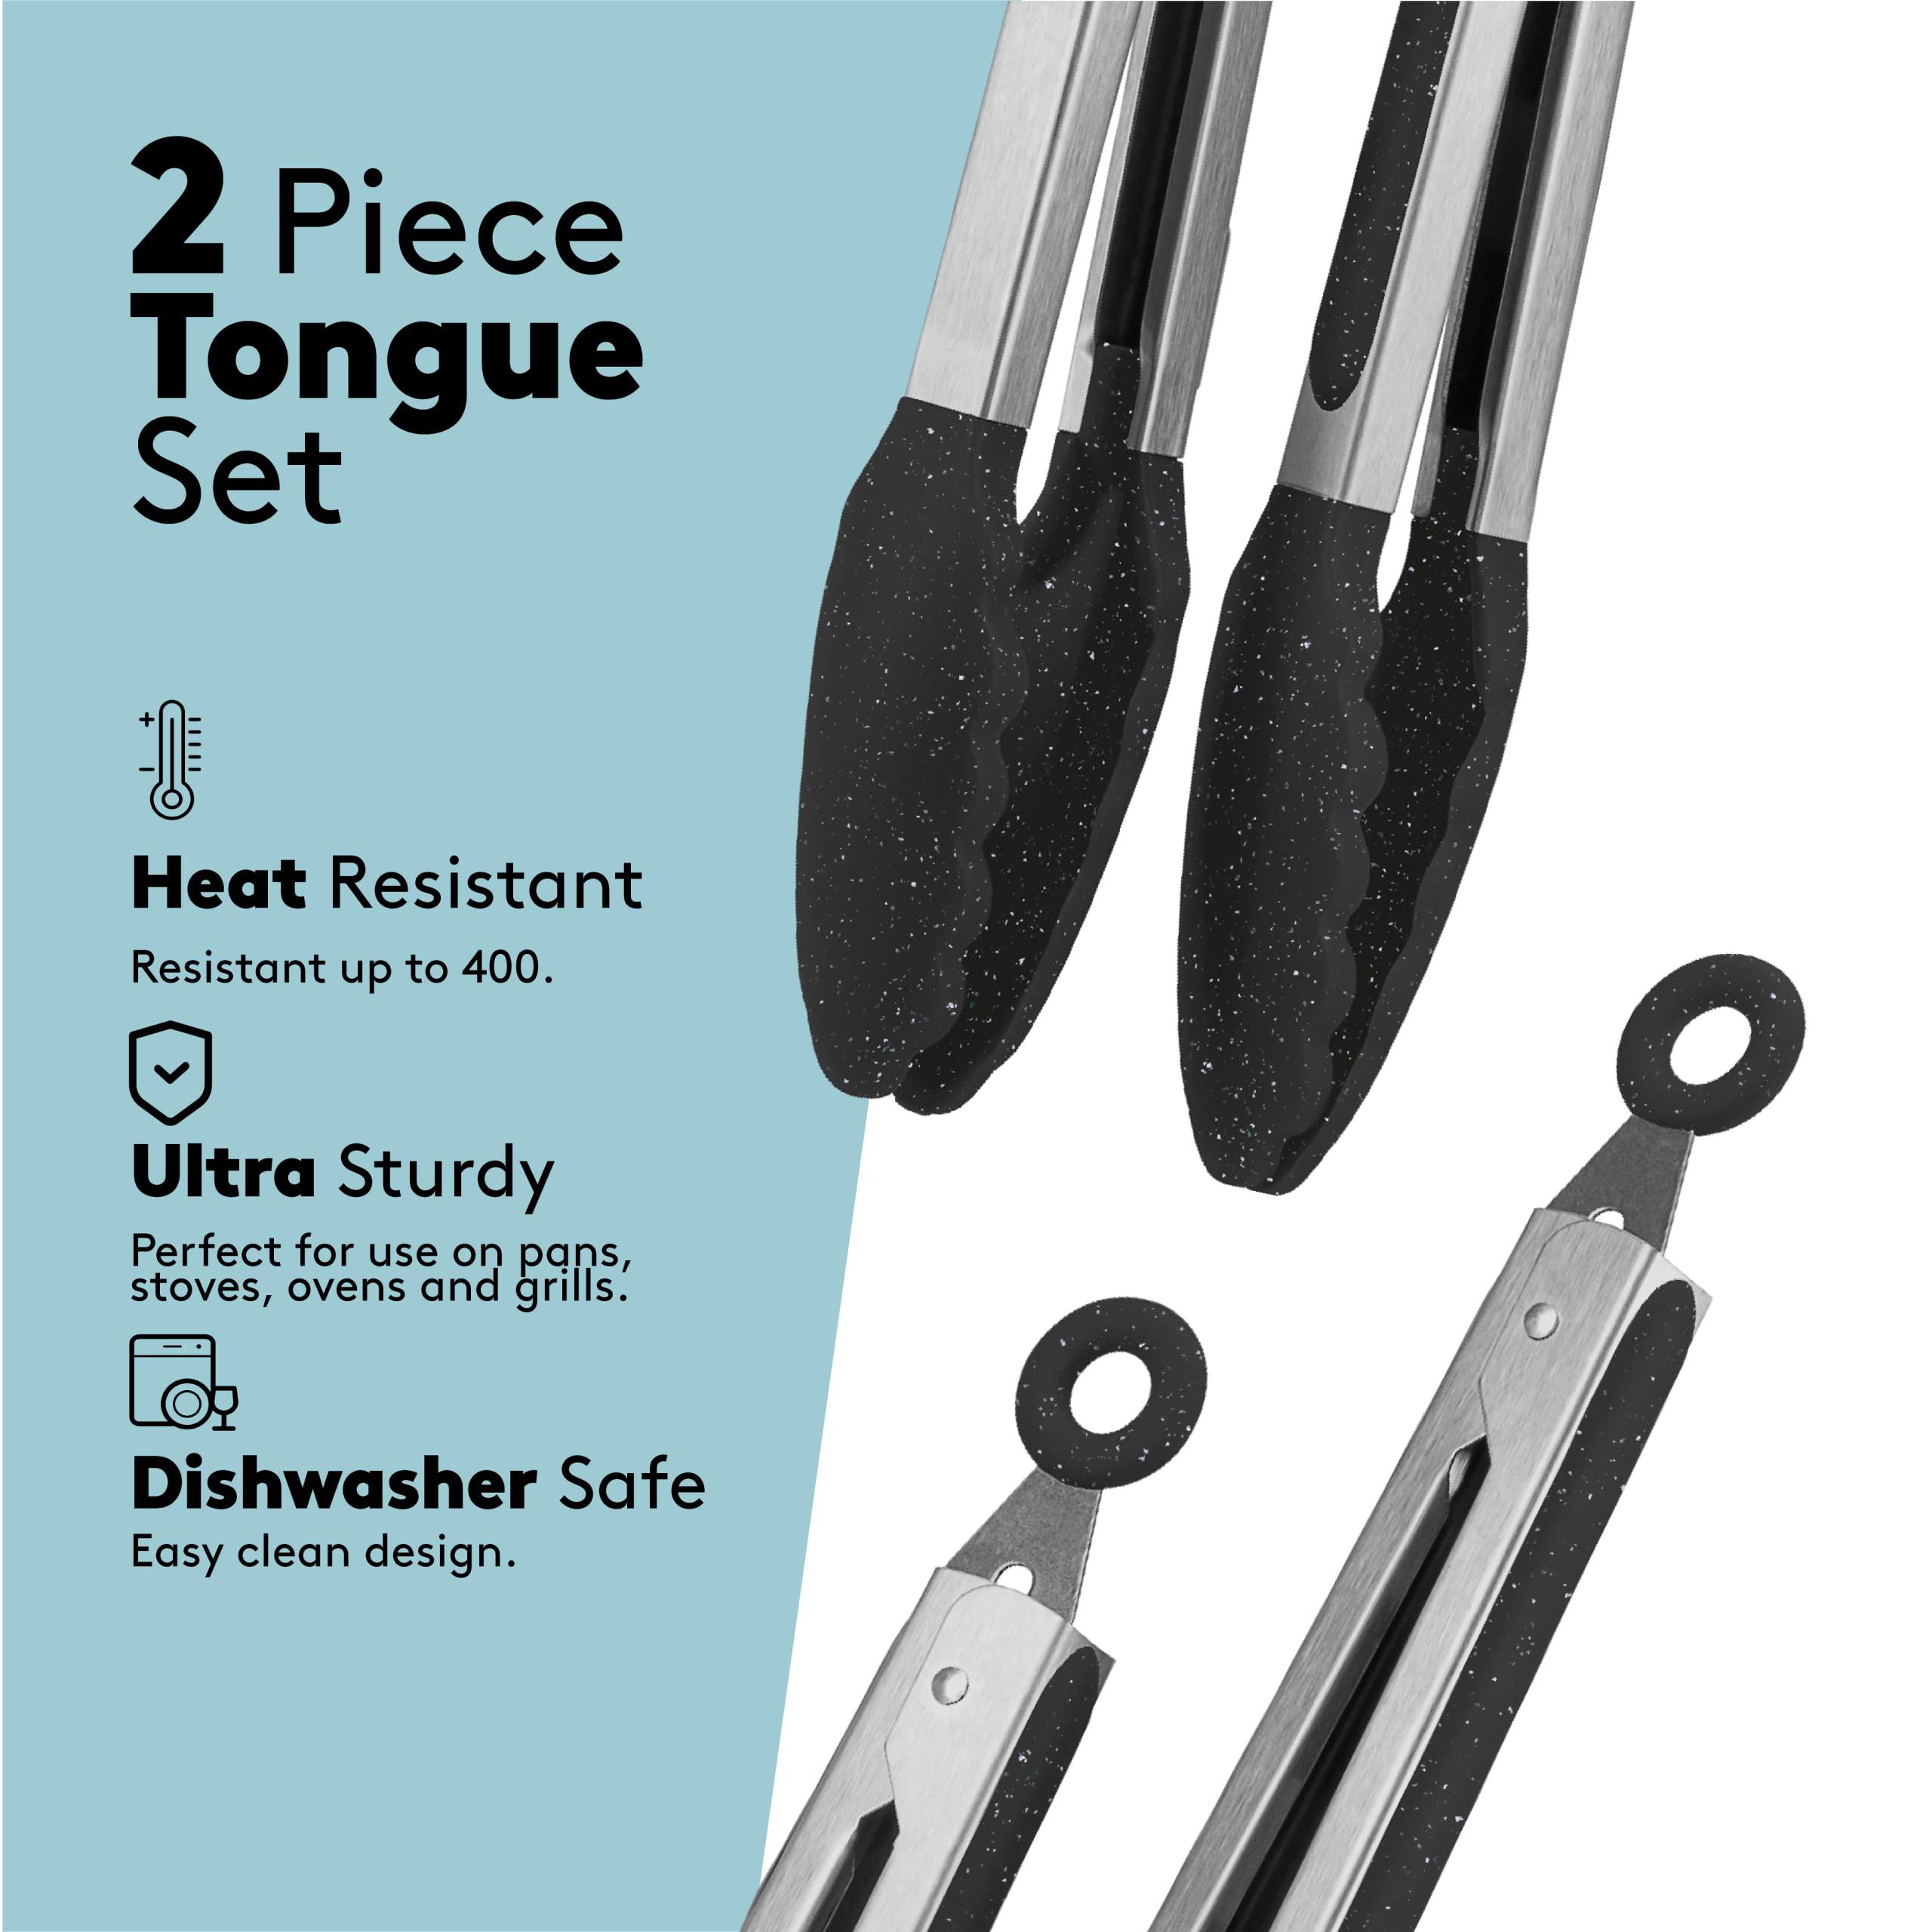 real simple tongs for cooking | set of 2 tongs for cooking with silicone tips for bbq grill, serving, cooking | locking tongs